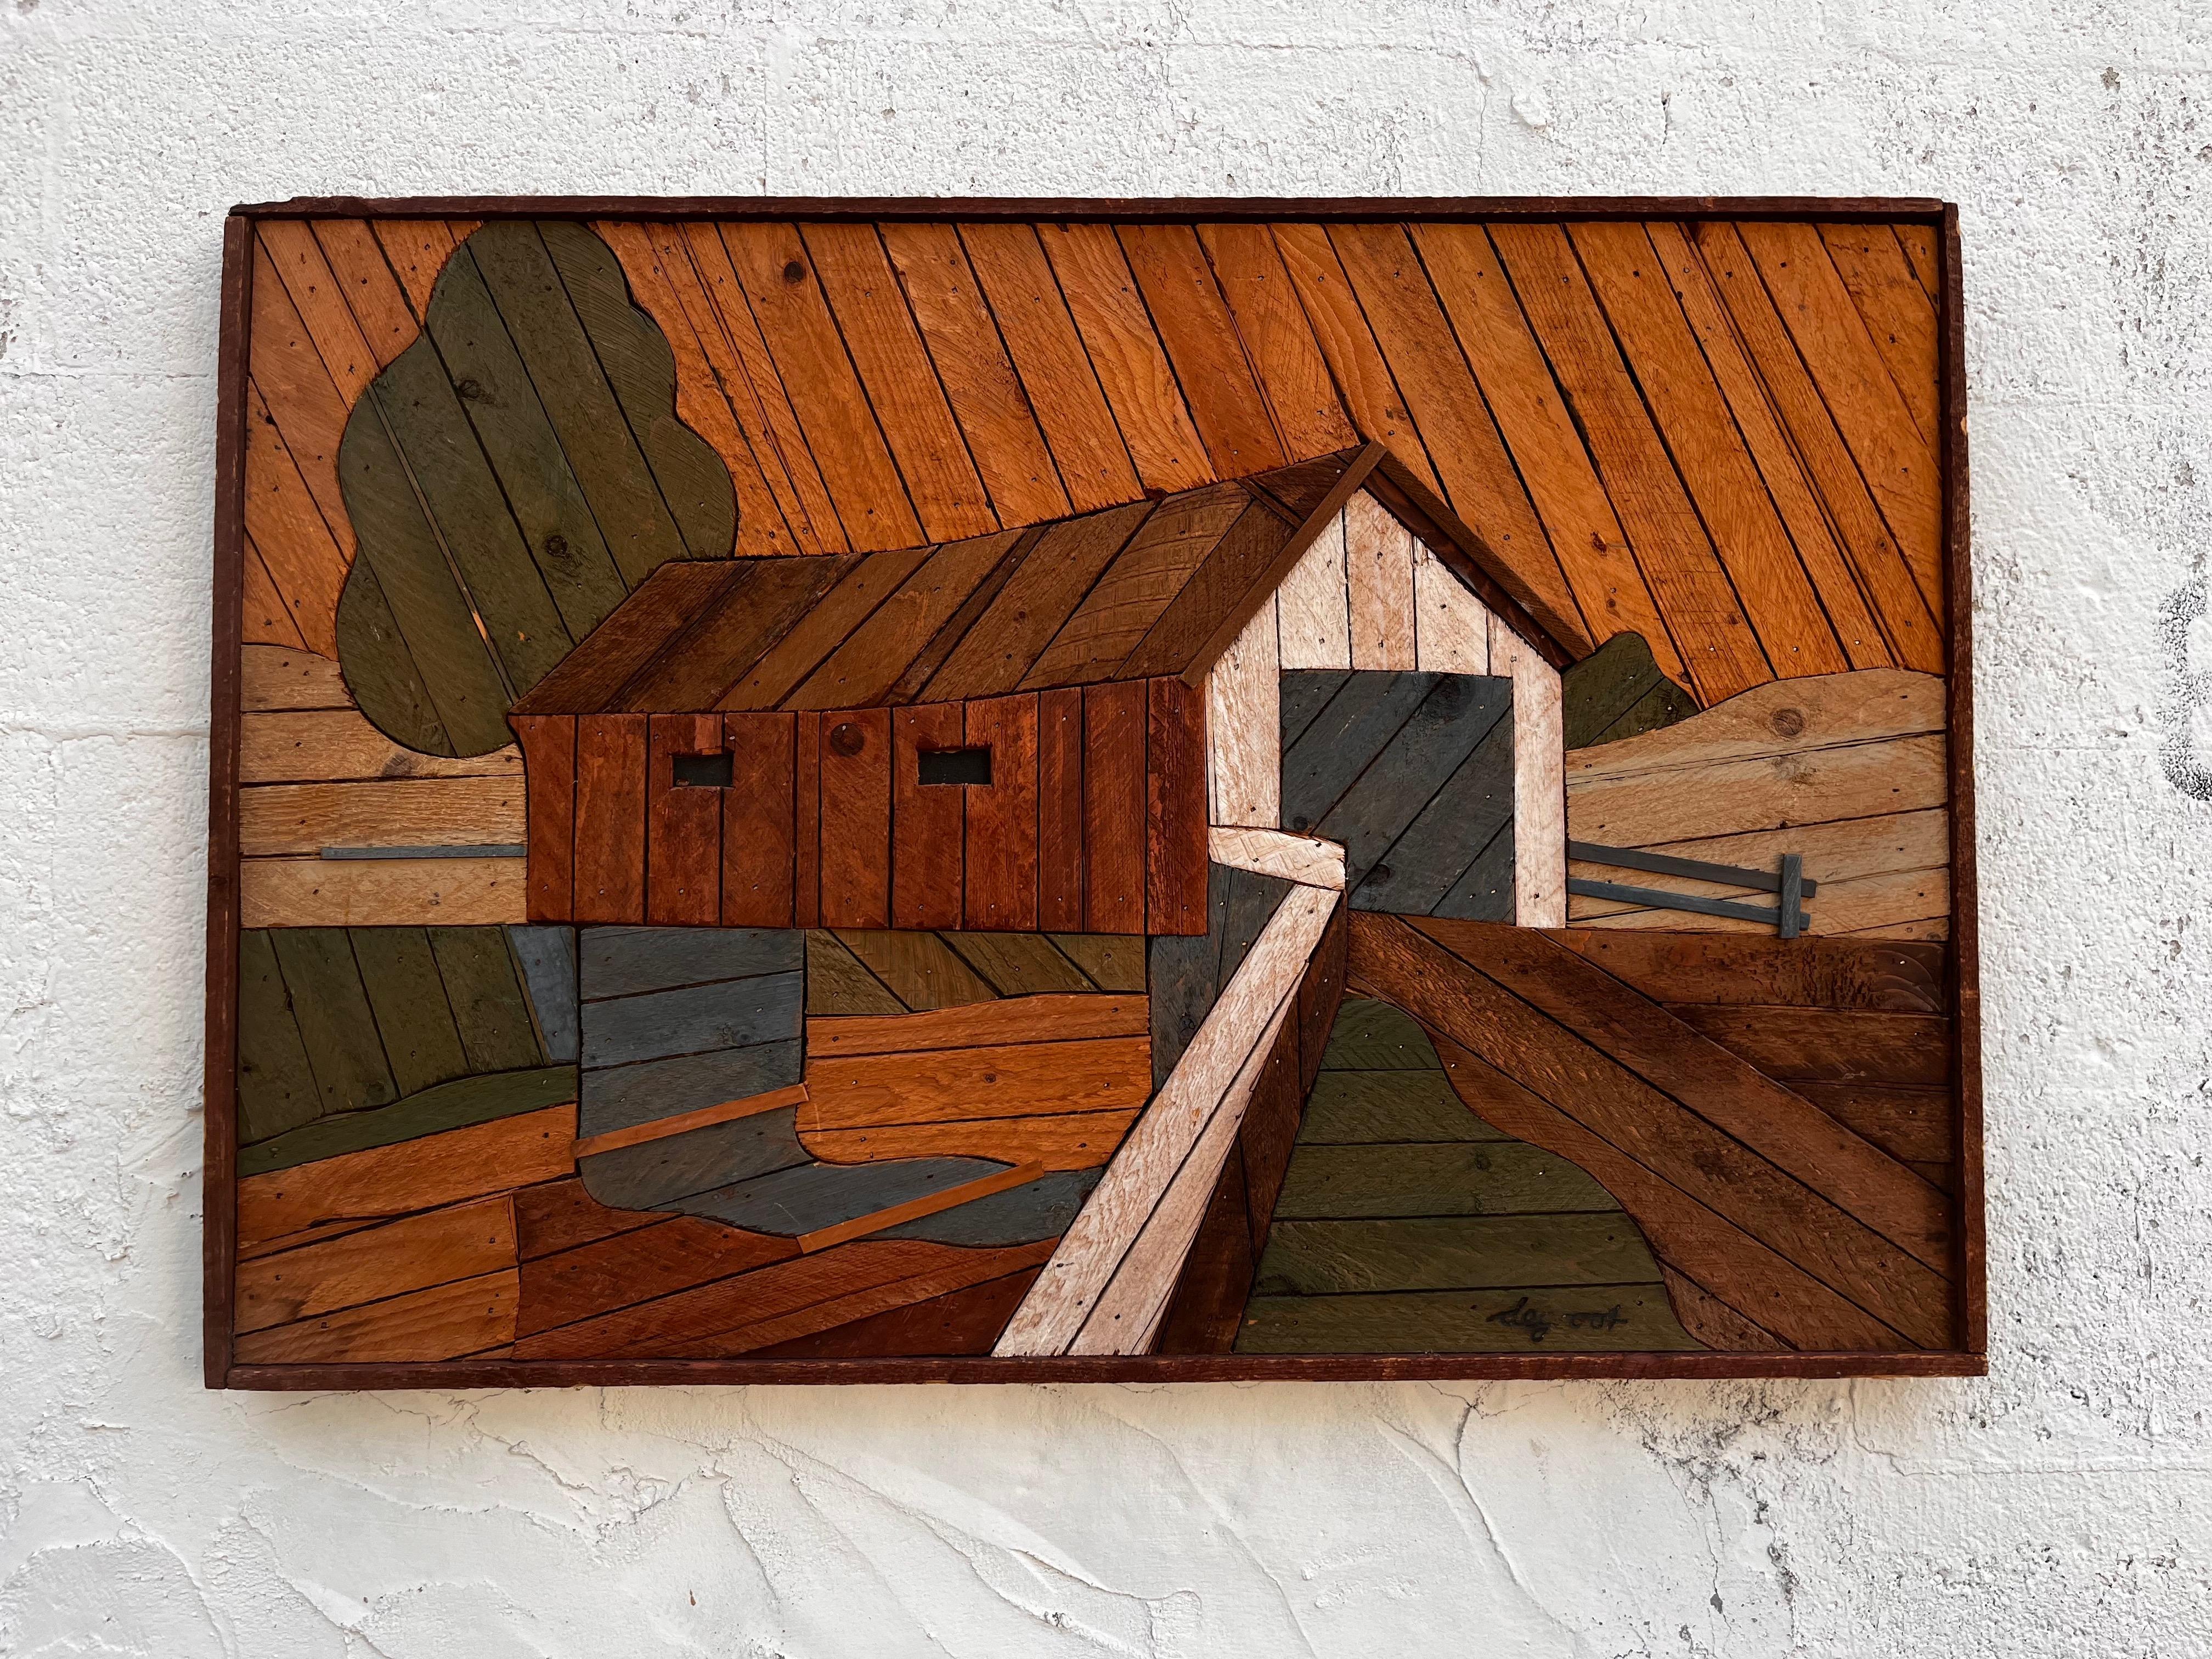 Original Lath Art by Austin Productions, hand painted and signed by the Dutch- American artist Theodore Degroot, circa 1970s 
This charming piece features a rustic depiction of a barn in a rural landscape.
In excellent original condition with